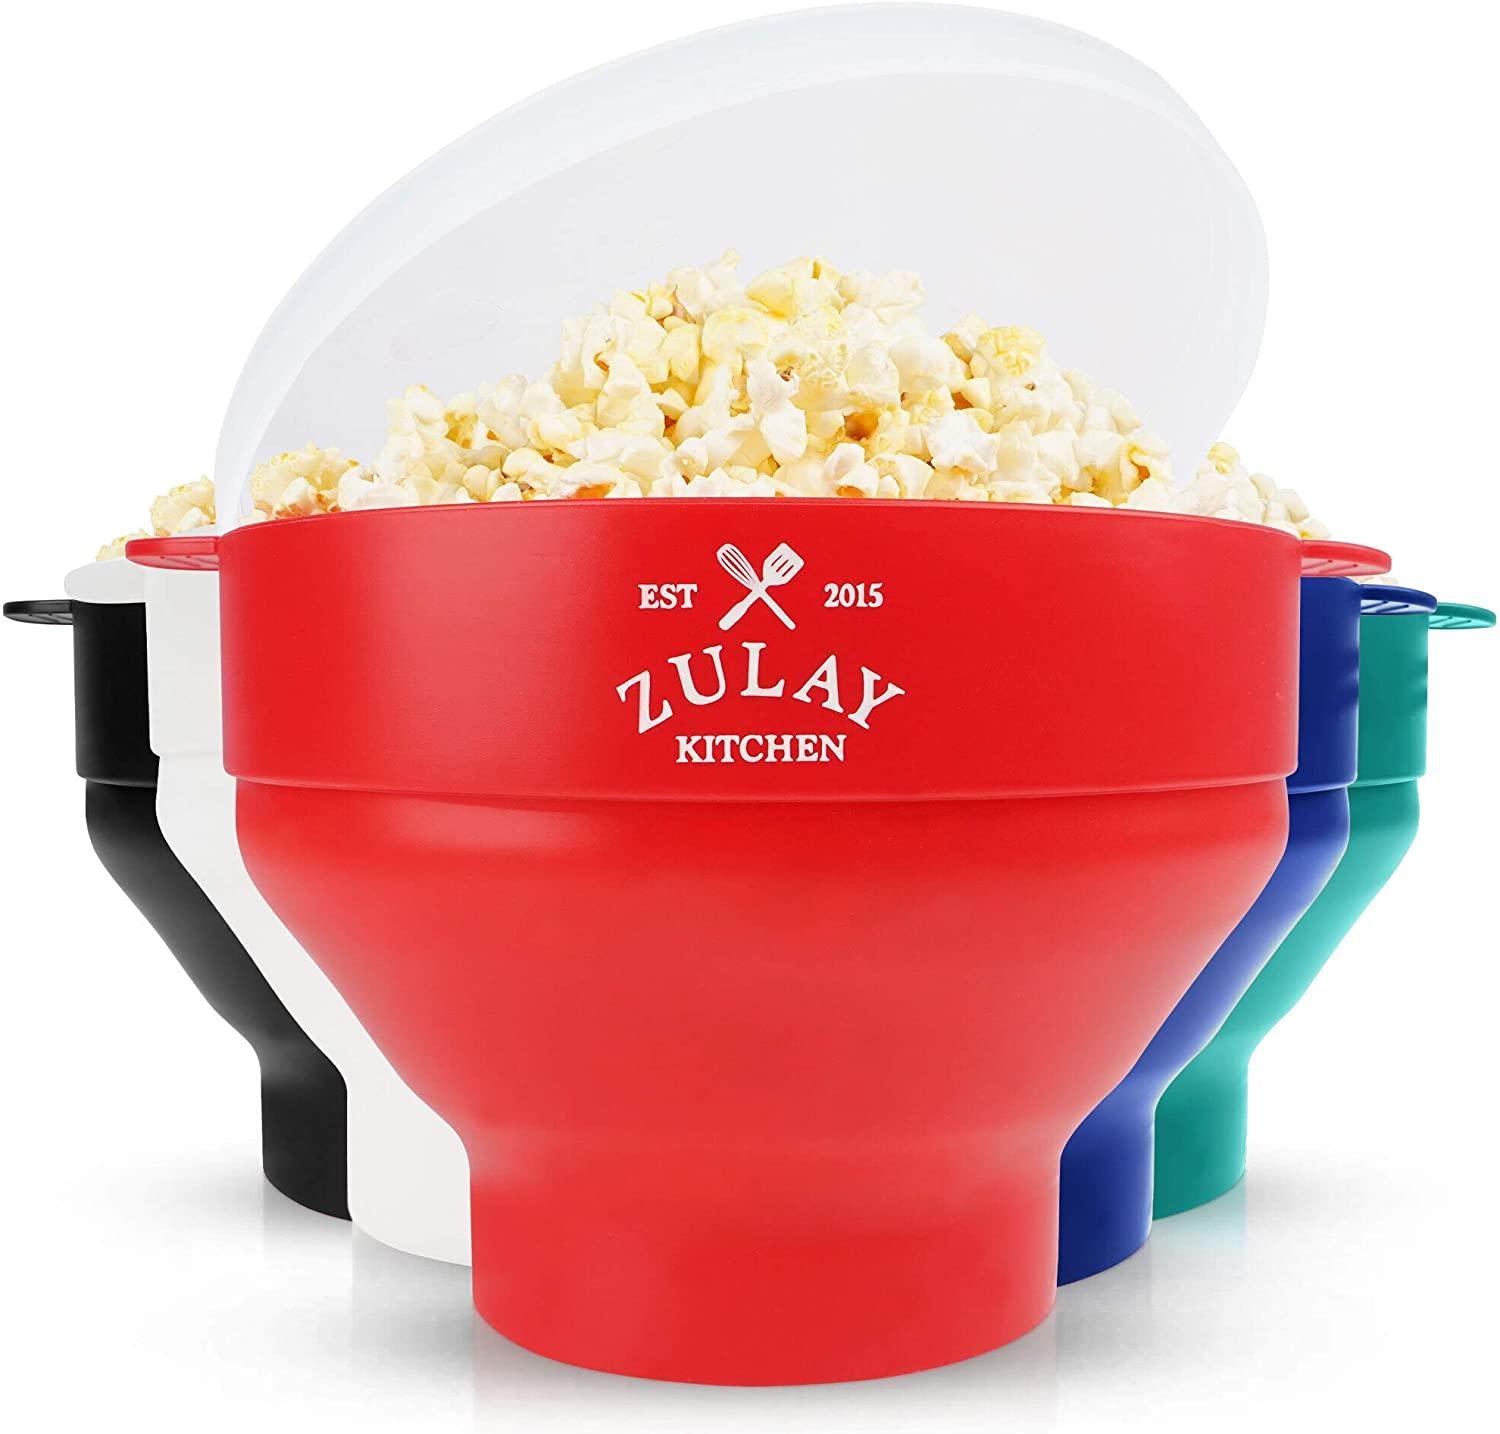 Popcorn Powder's Microwavable Silicone Collapsible Red Popcorn Popper